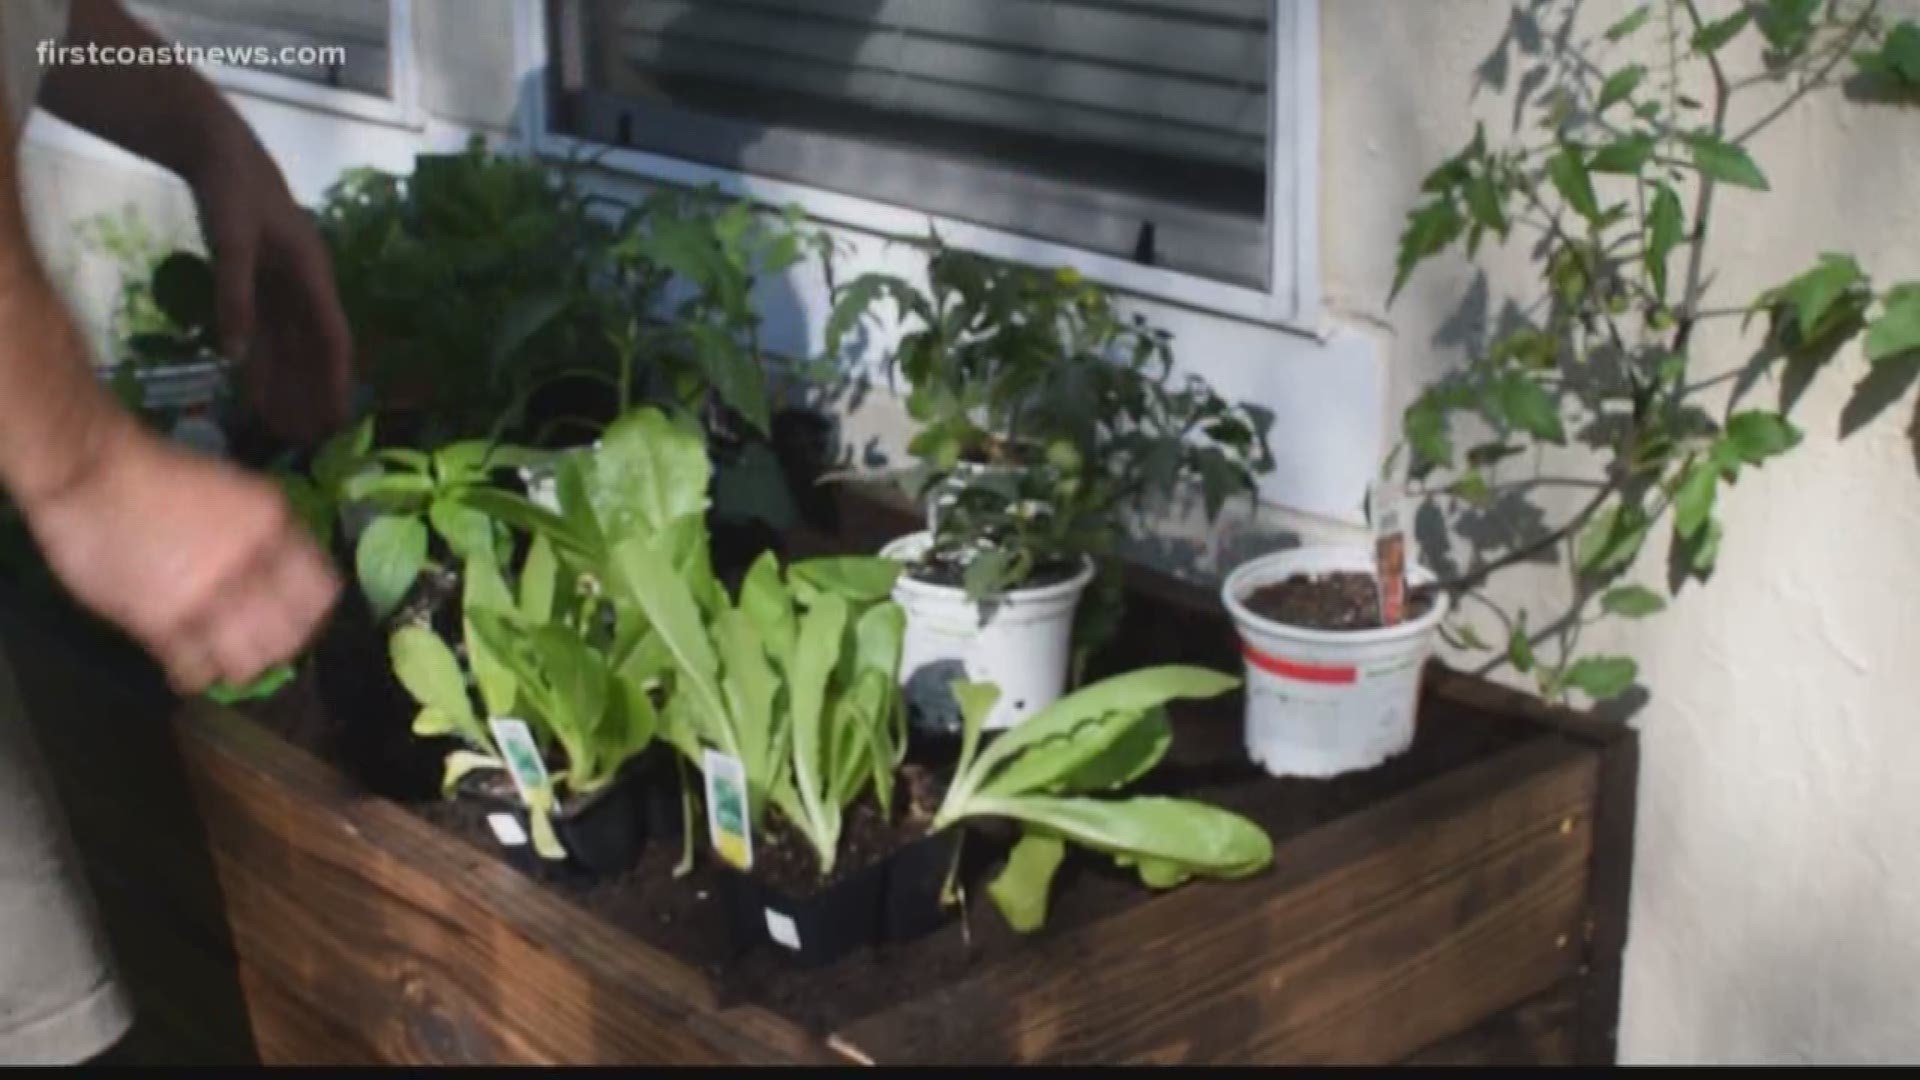 As more and more people try to avoid having to leave their homes, some are turning to growing their owns fruits and vegetables.